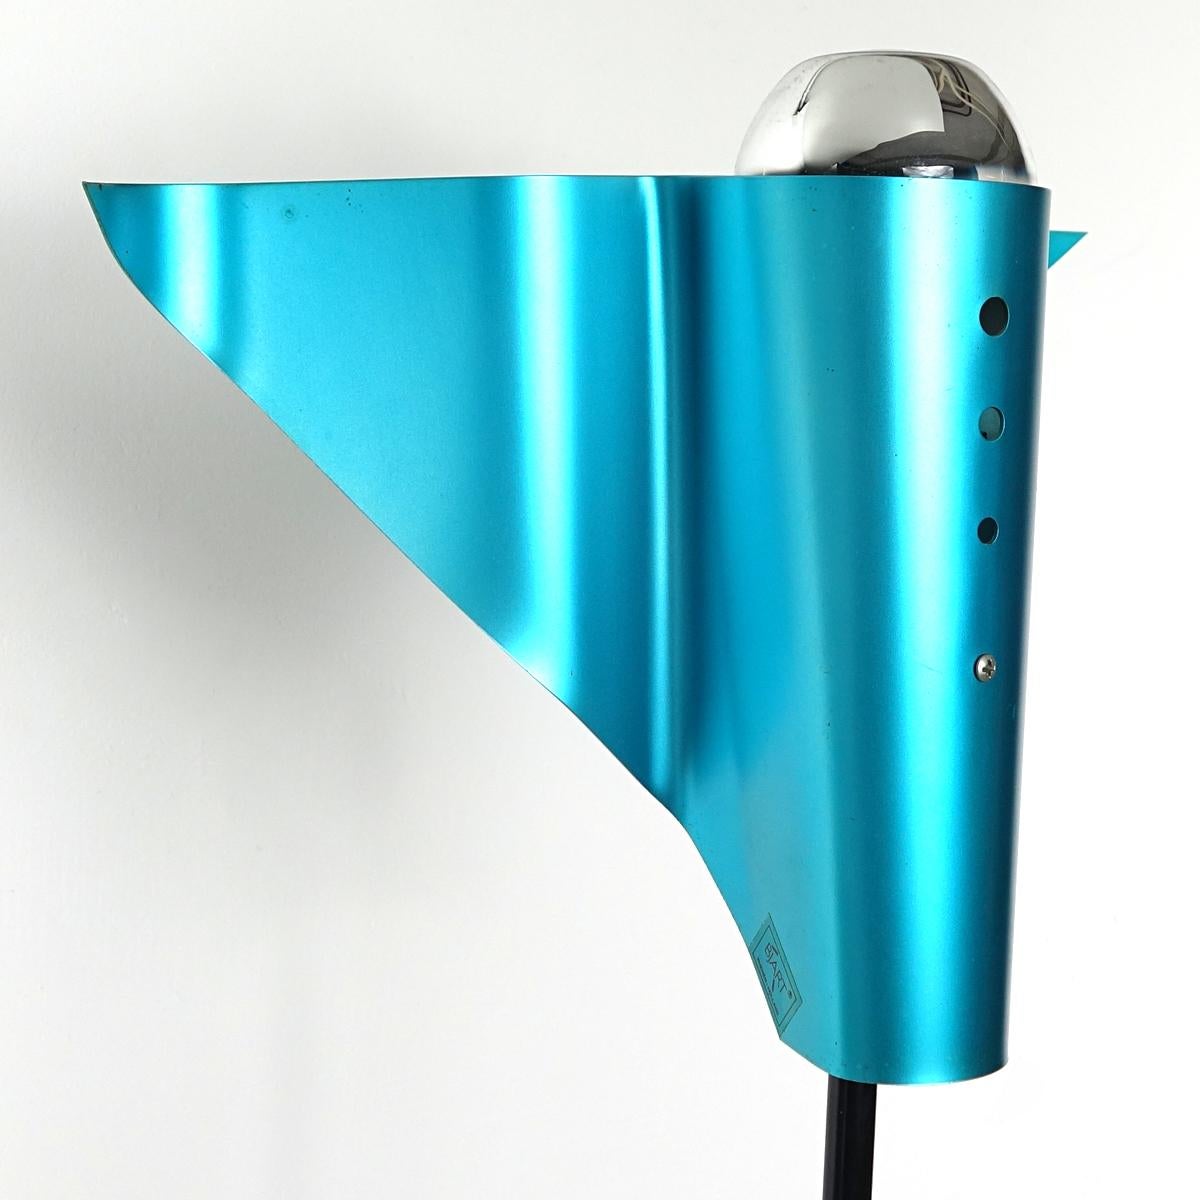 Late 20th Century Post-Modern Metal Floor Lamp with Blue Bird-Shaped Shade by Bjart Rhenen For Sale